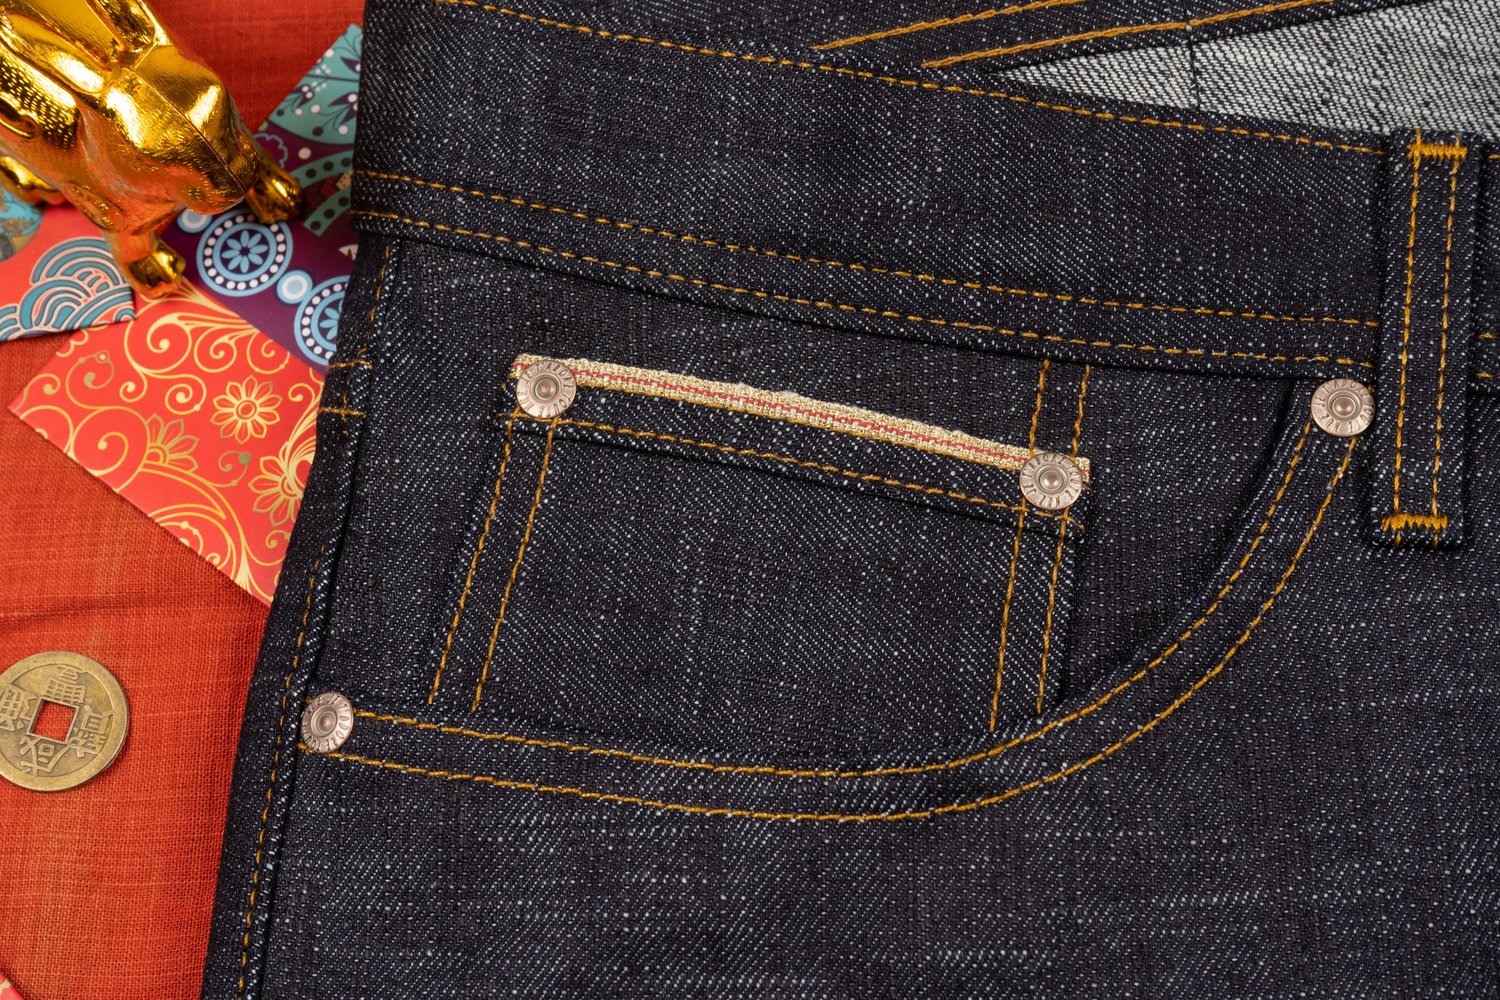 Chinese New Year - Water Rabbit Selvedge - Coin Pocket